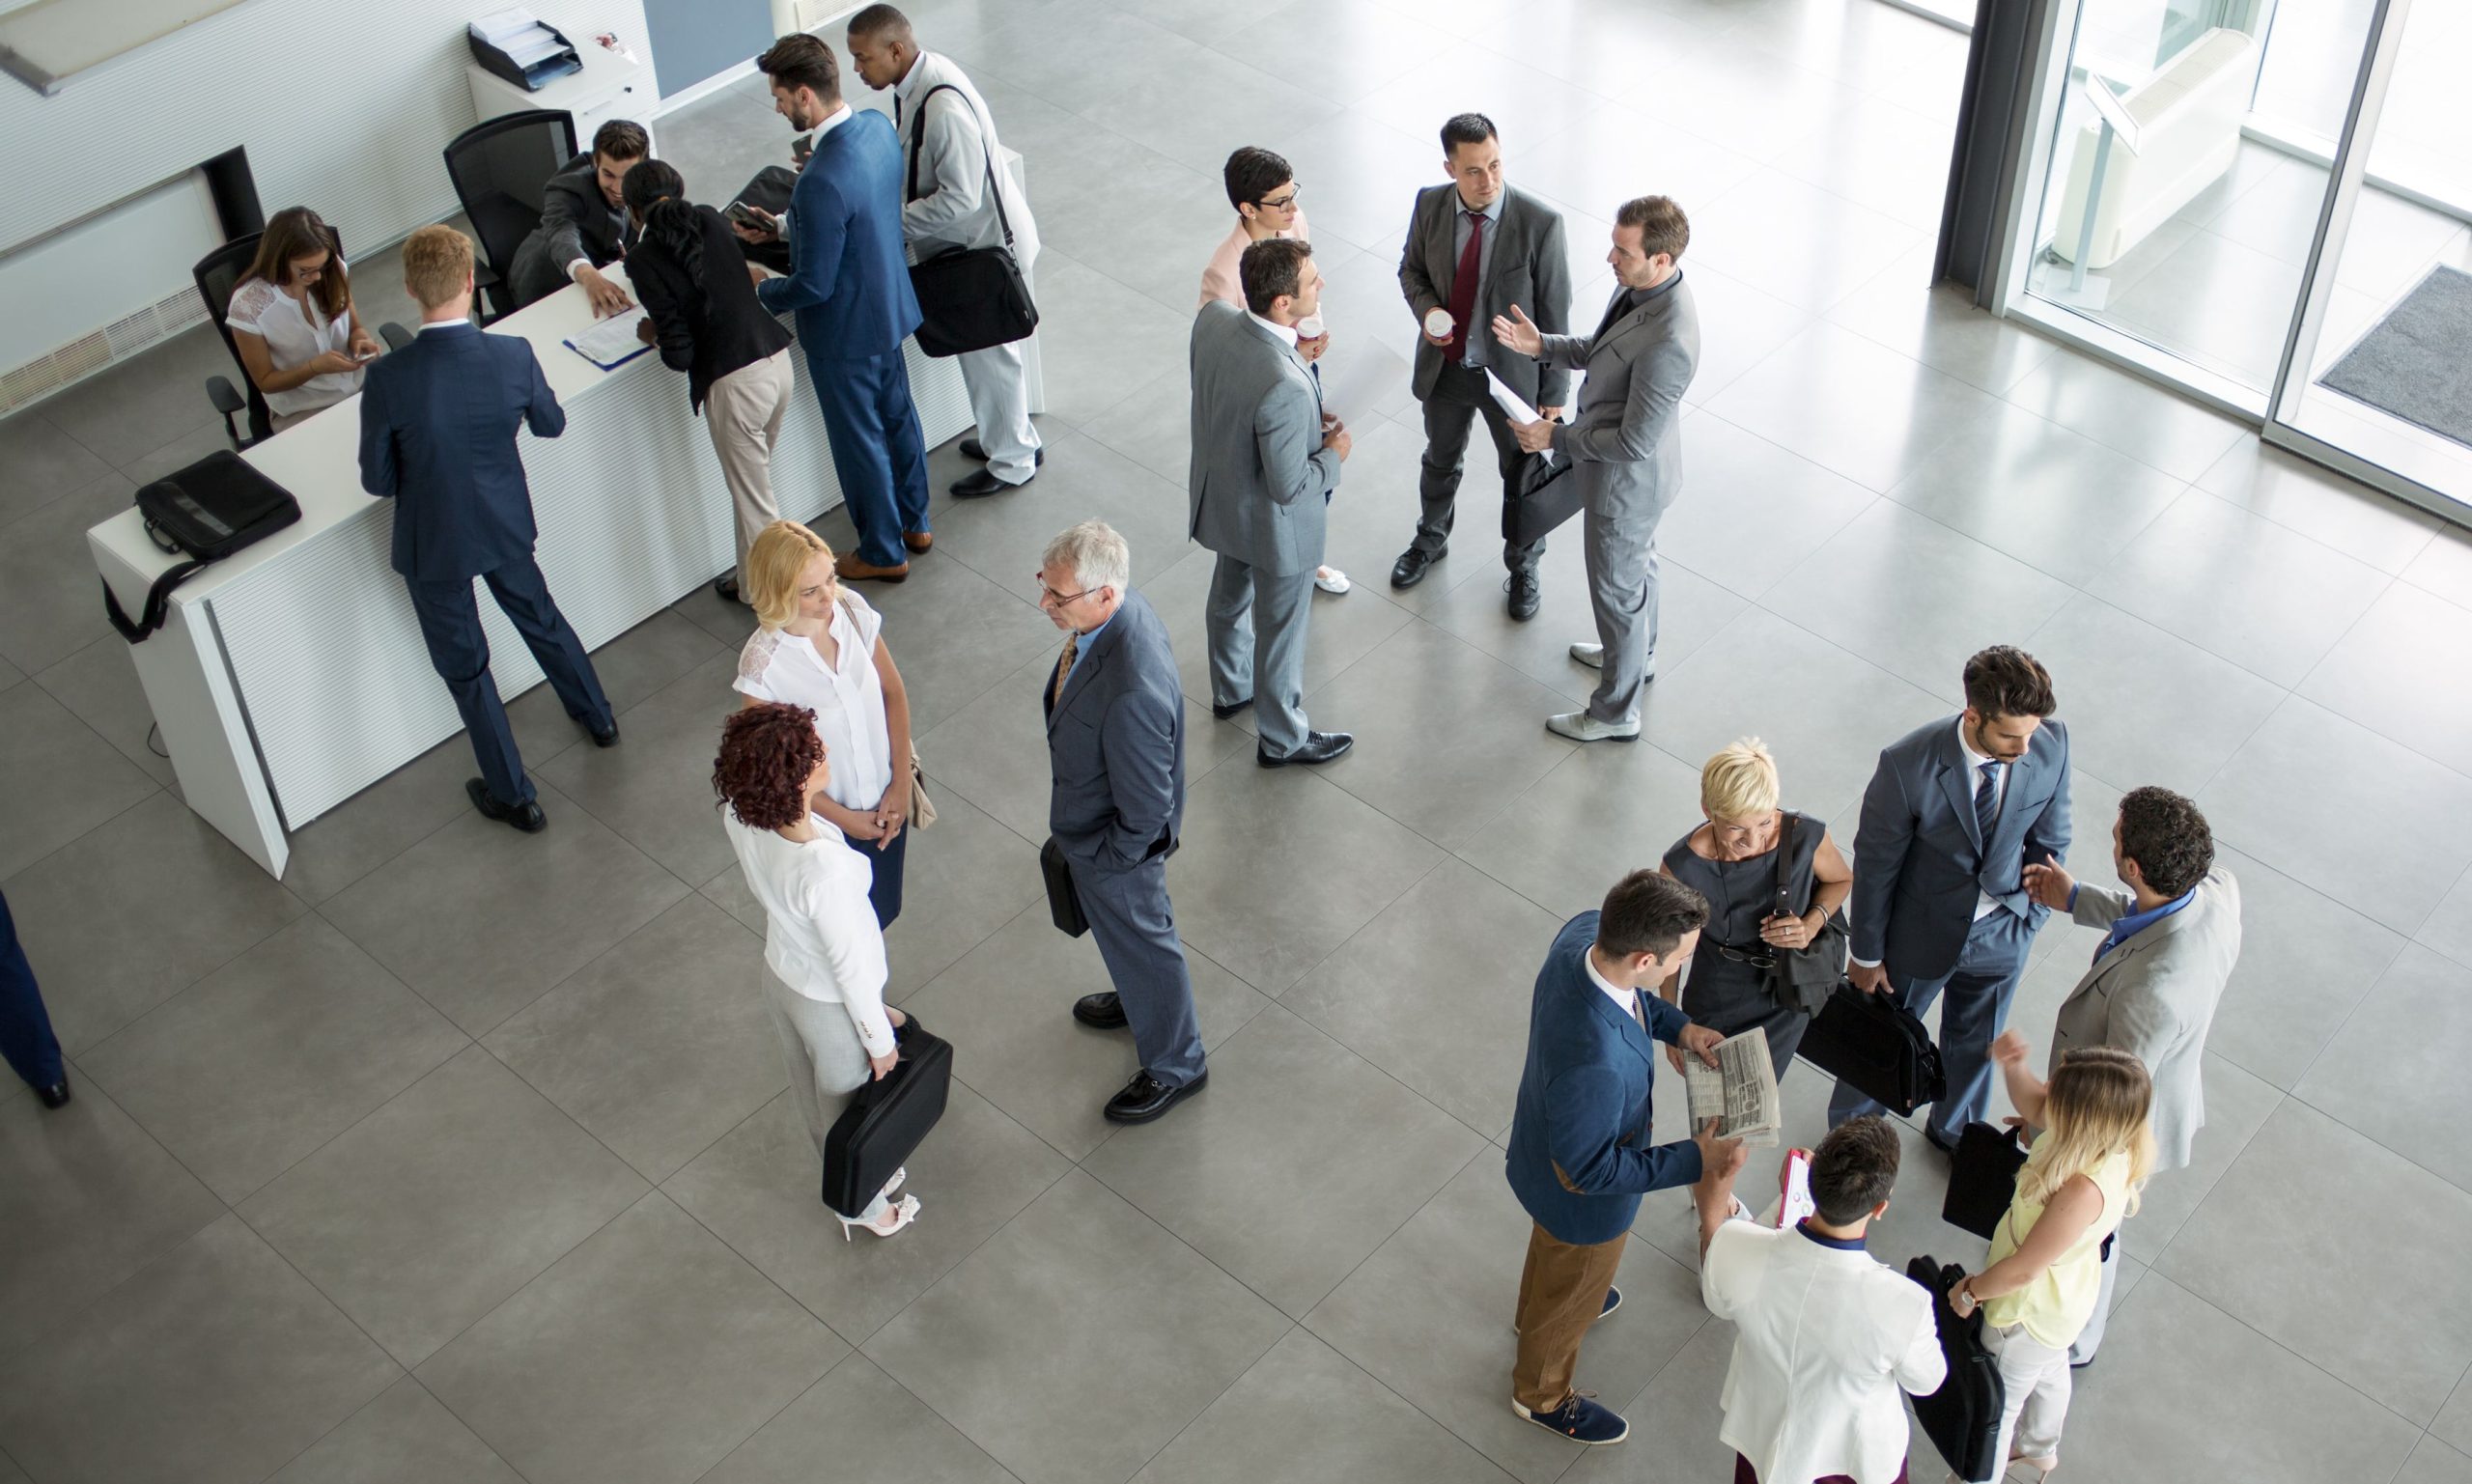 Standing and Talking at a Networking Event